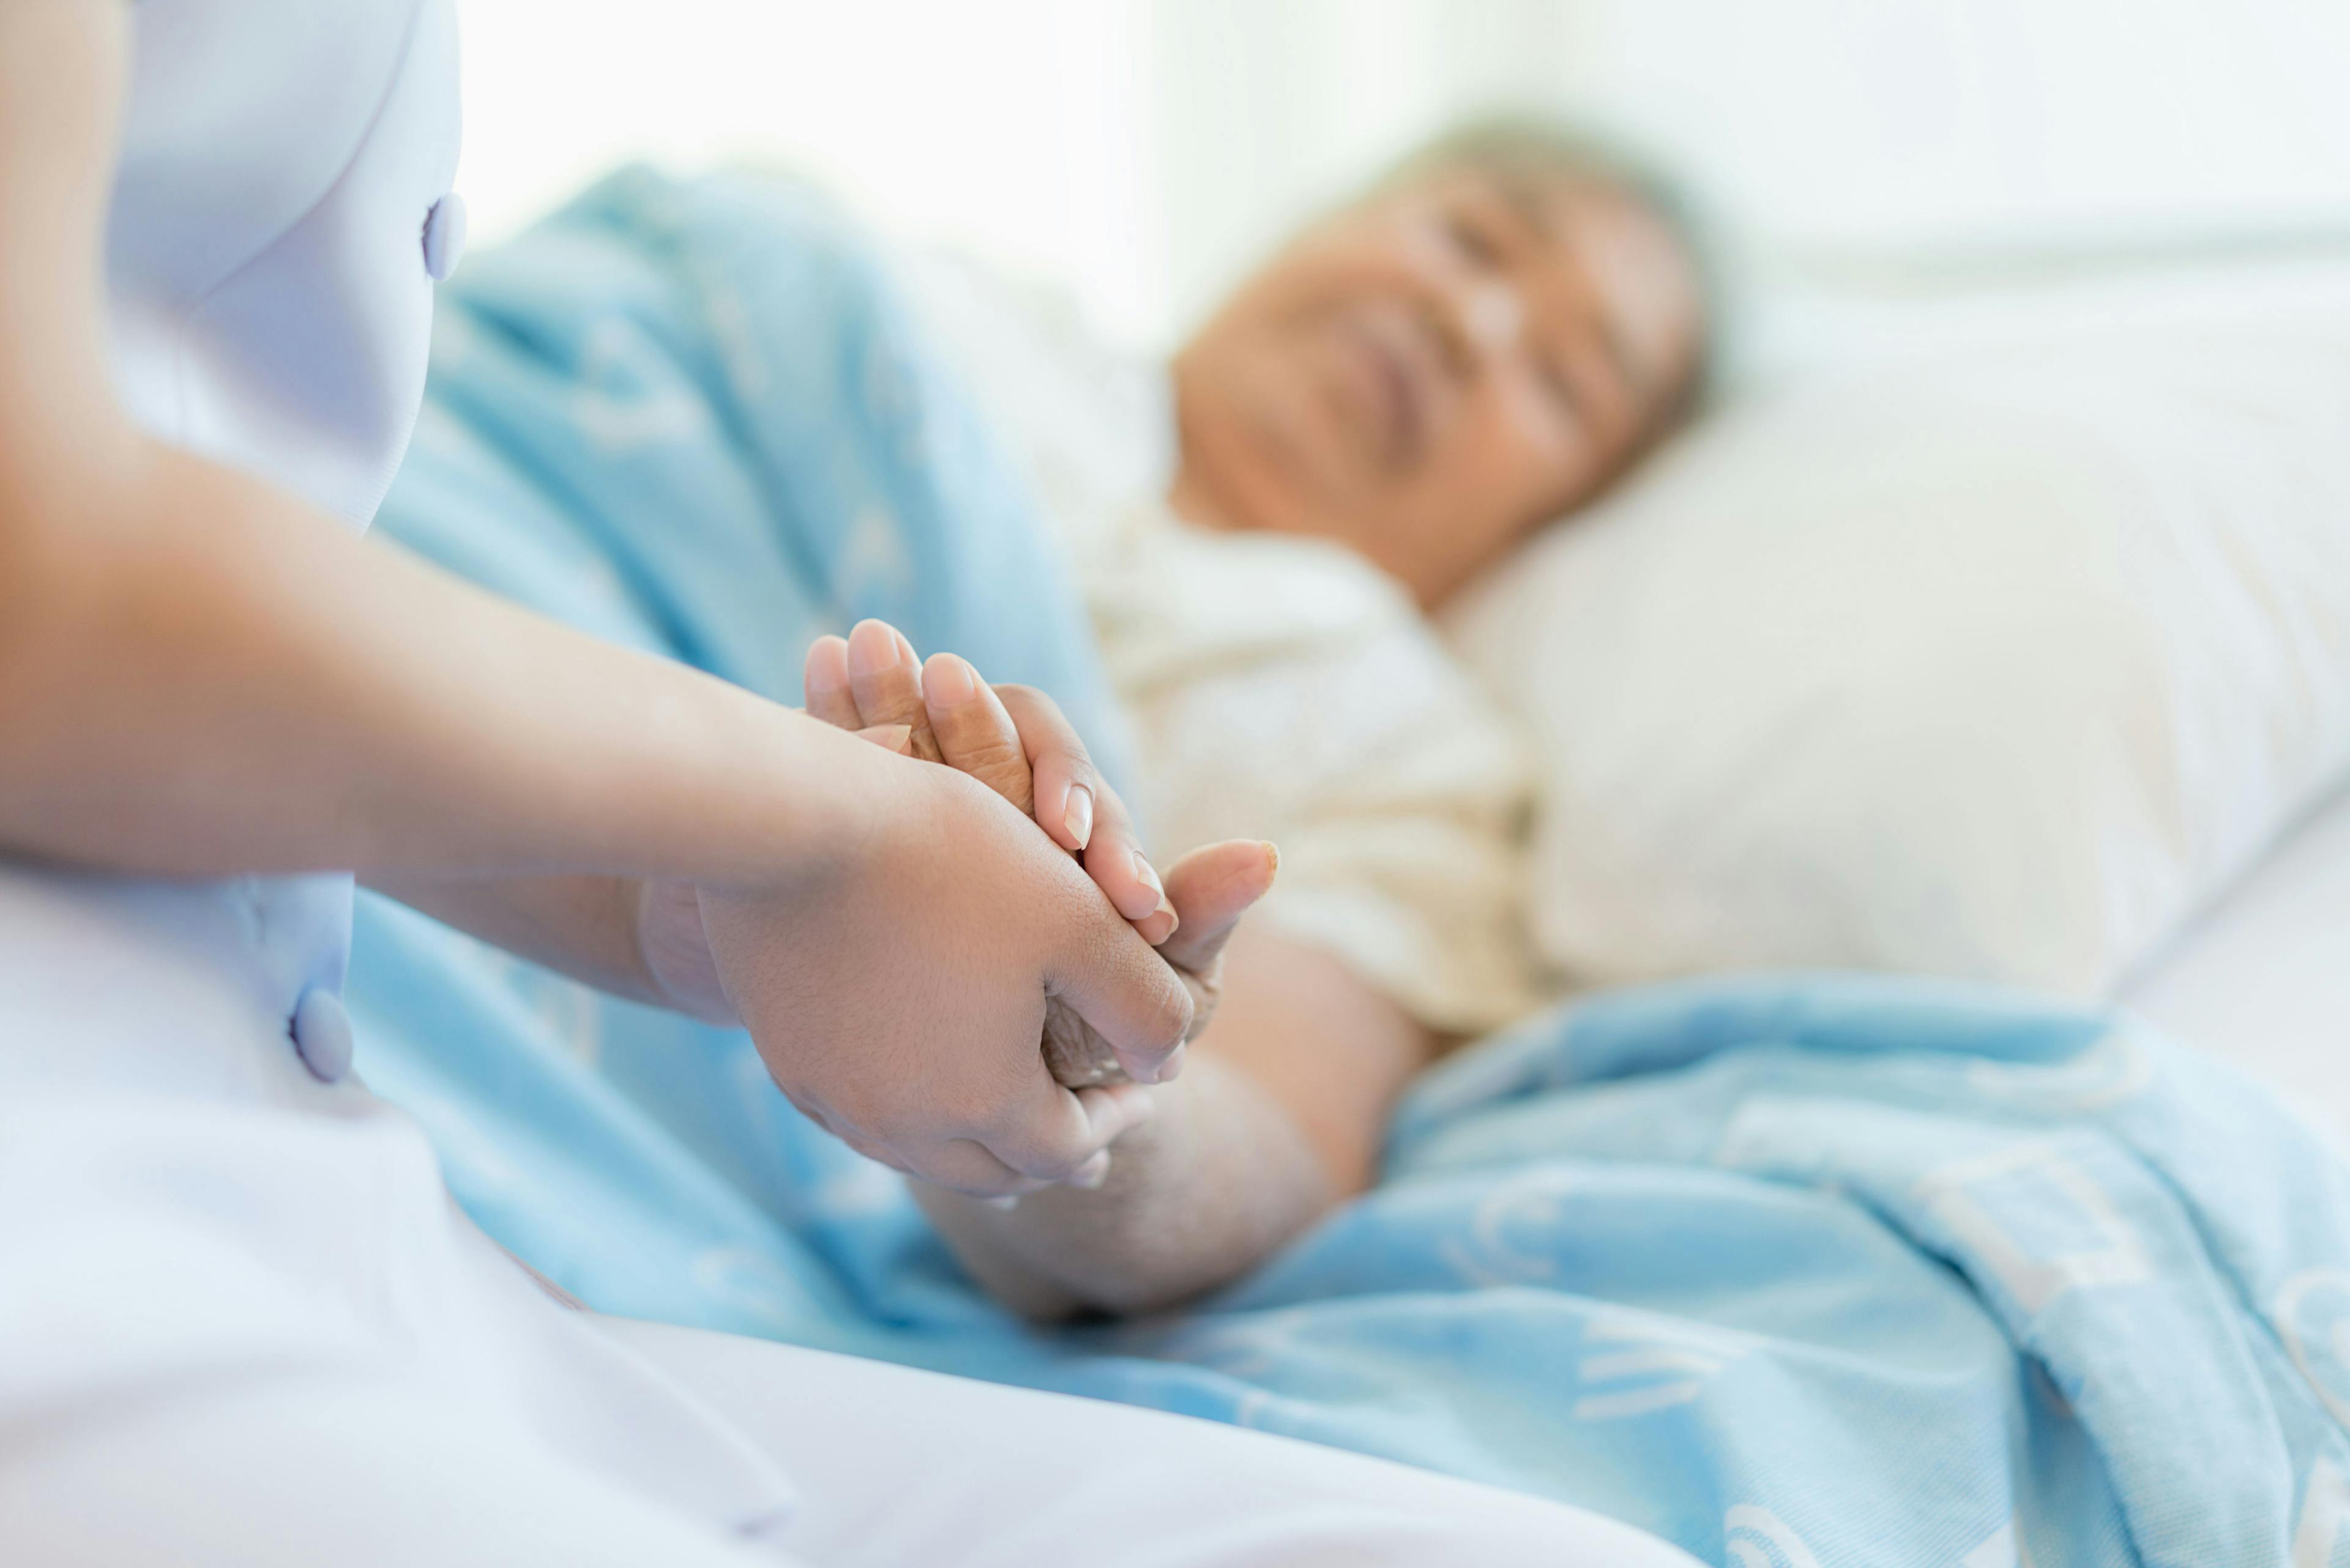 Supportive Care and Palliative Care May Improve Outcomes in Patients Receiving CAR-T Cell Therapy